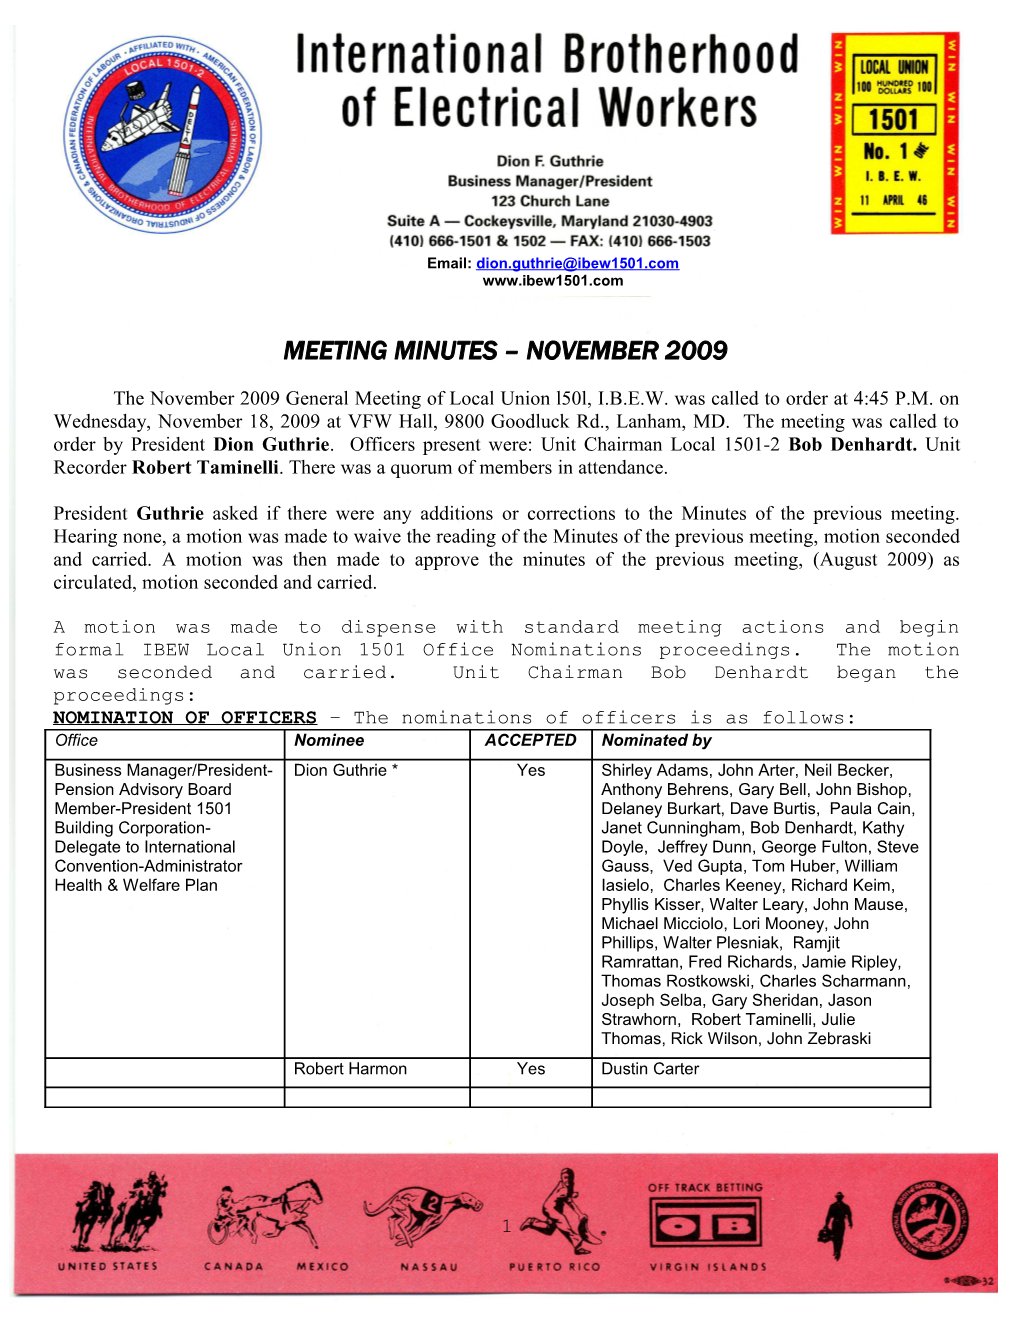 MINUTES of the AUGUST 2006 GENERAL MEETING of LOCAL UNION L50l IBEW AFL-CIO